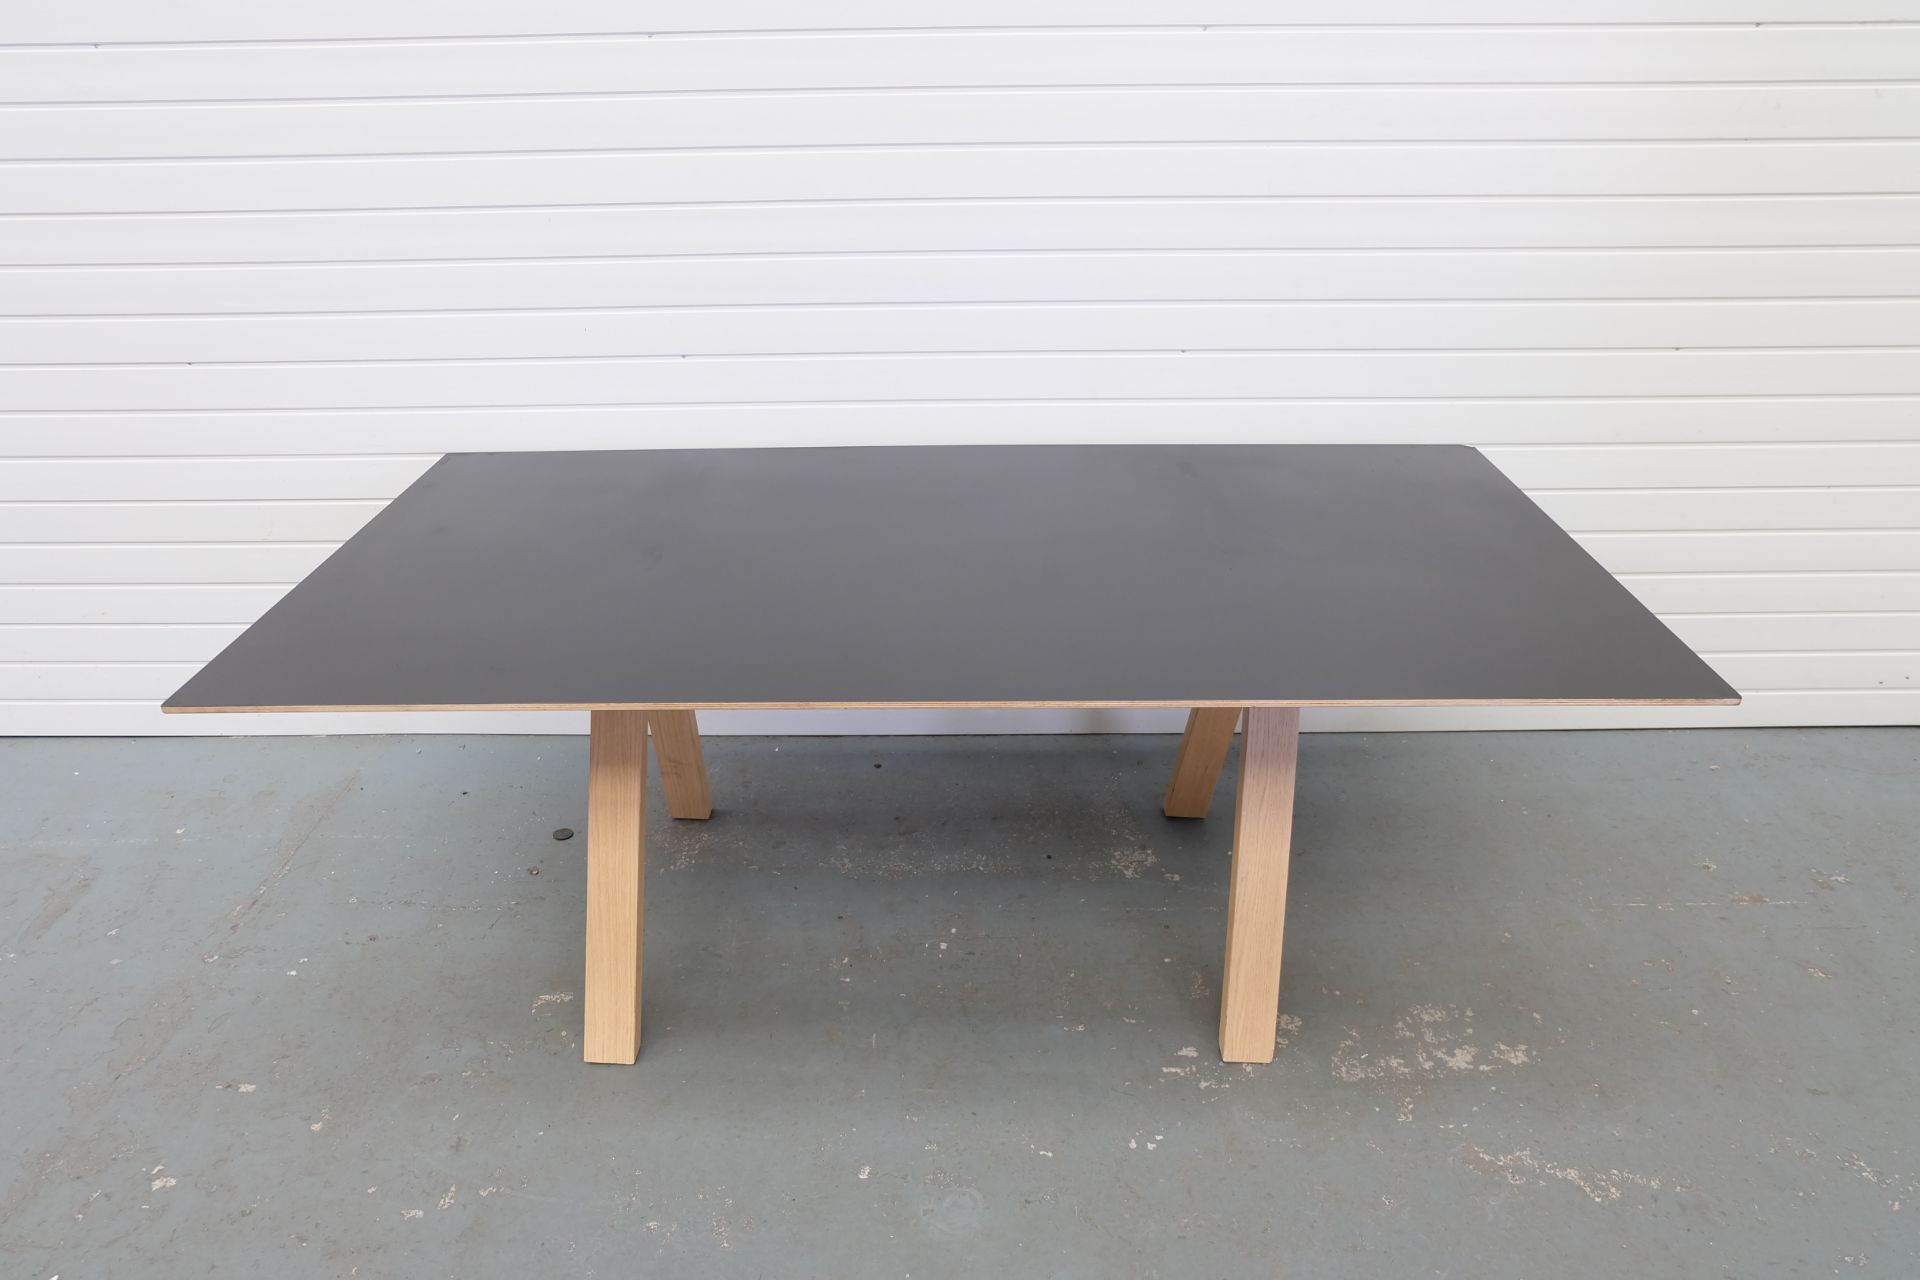 Black Top Desk With Wooden Legs. Size 2000mm x 1000mm x 745mm High. - Image 2 of 3